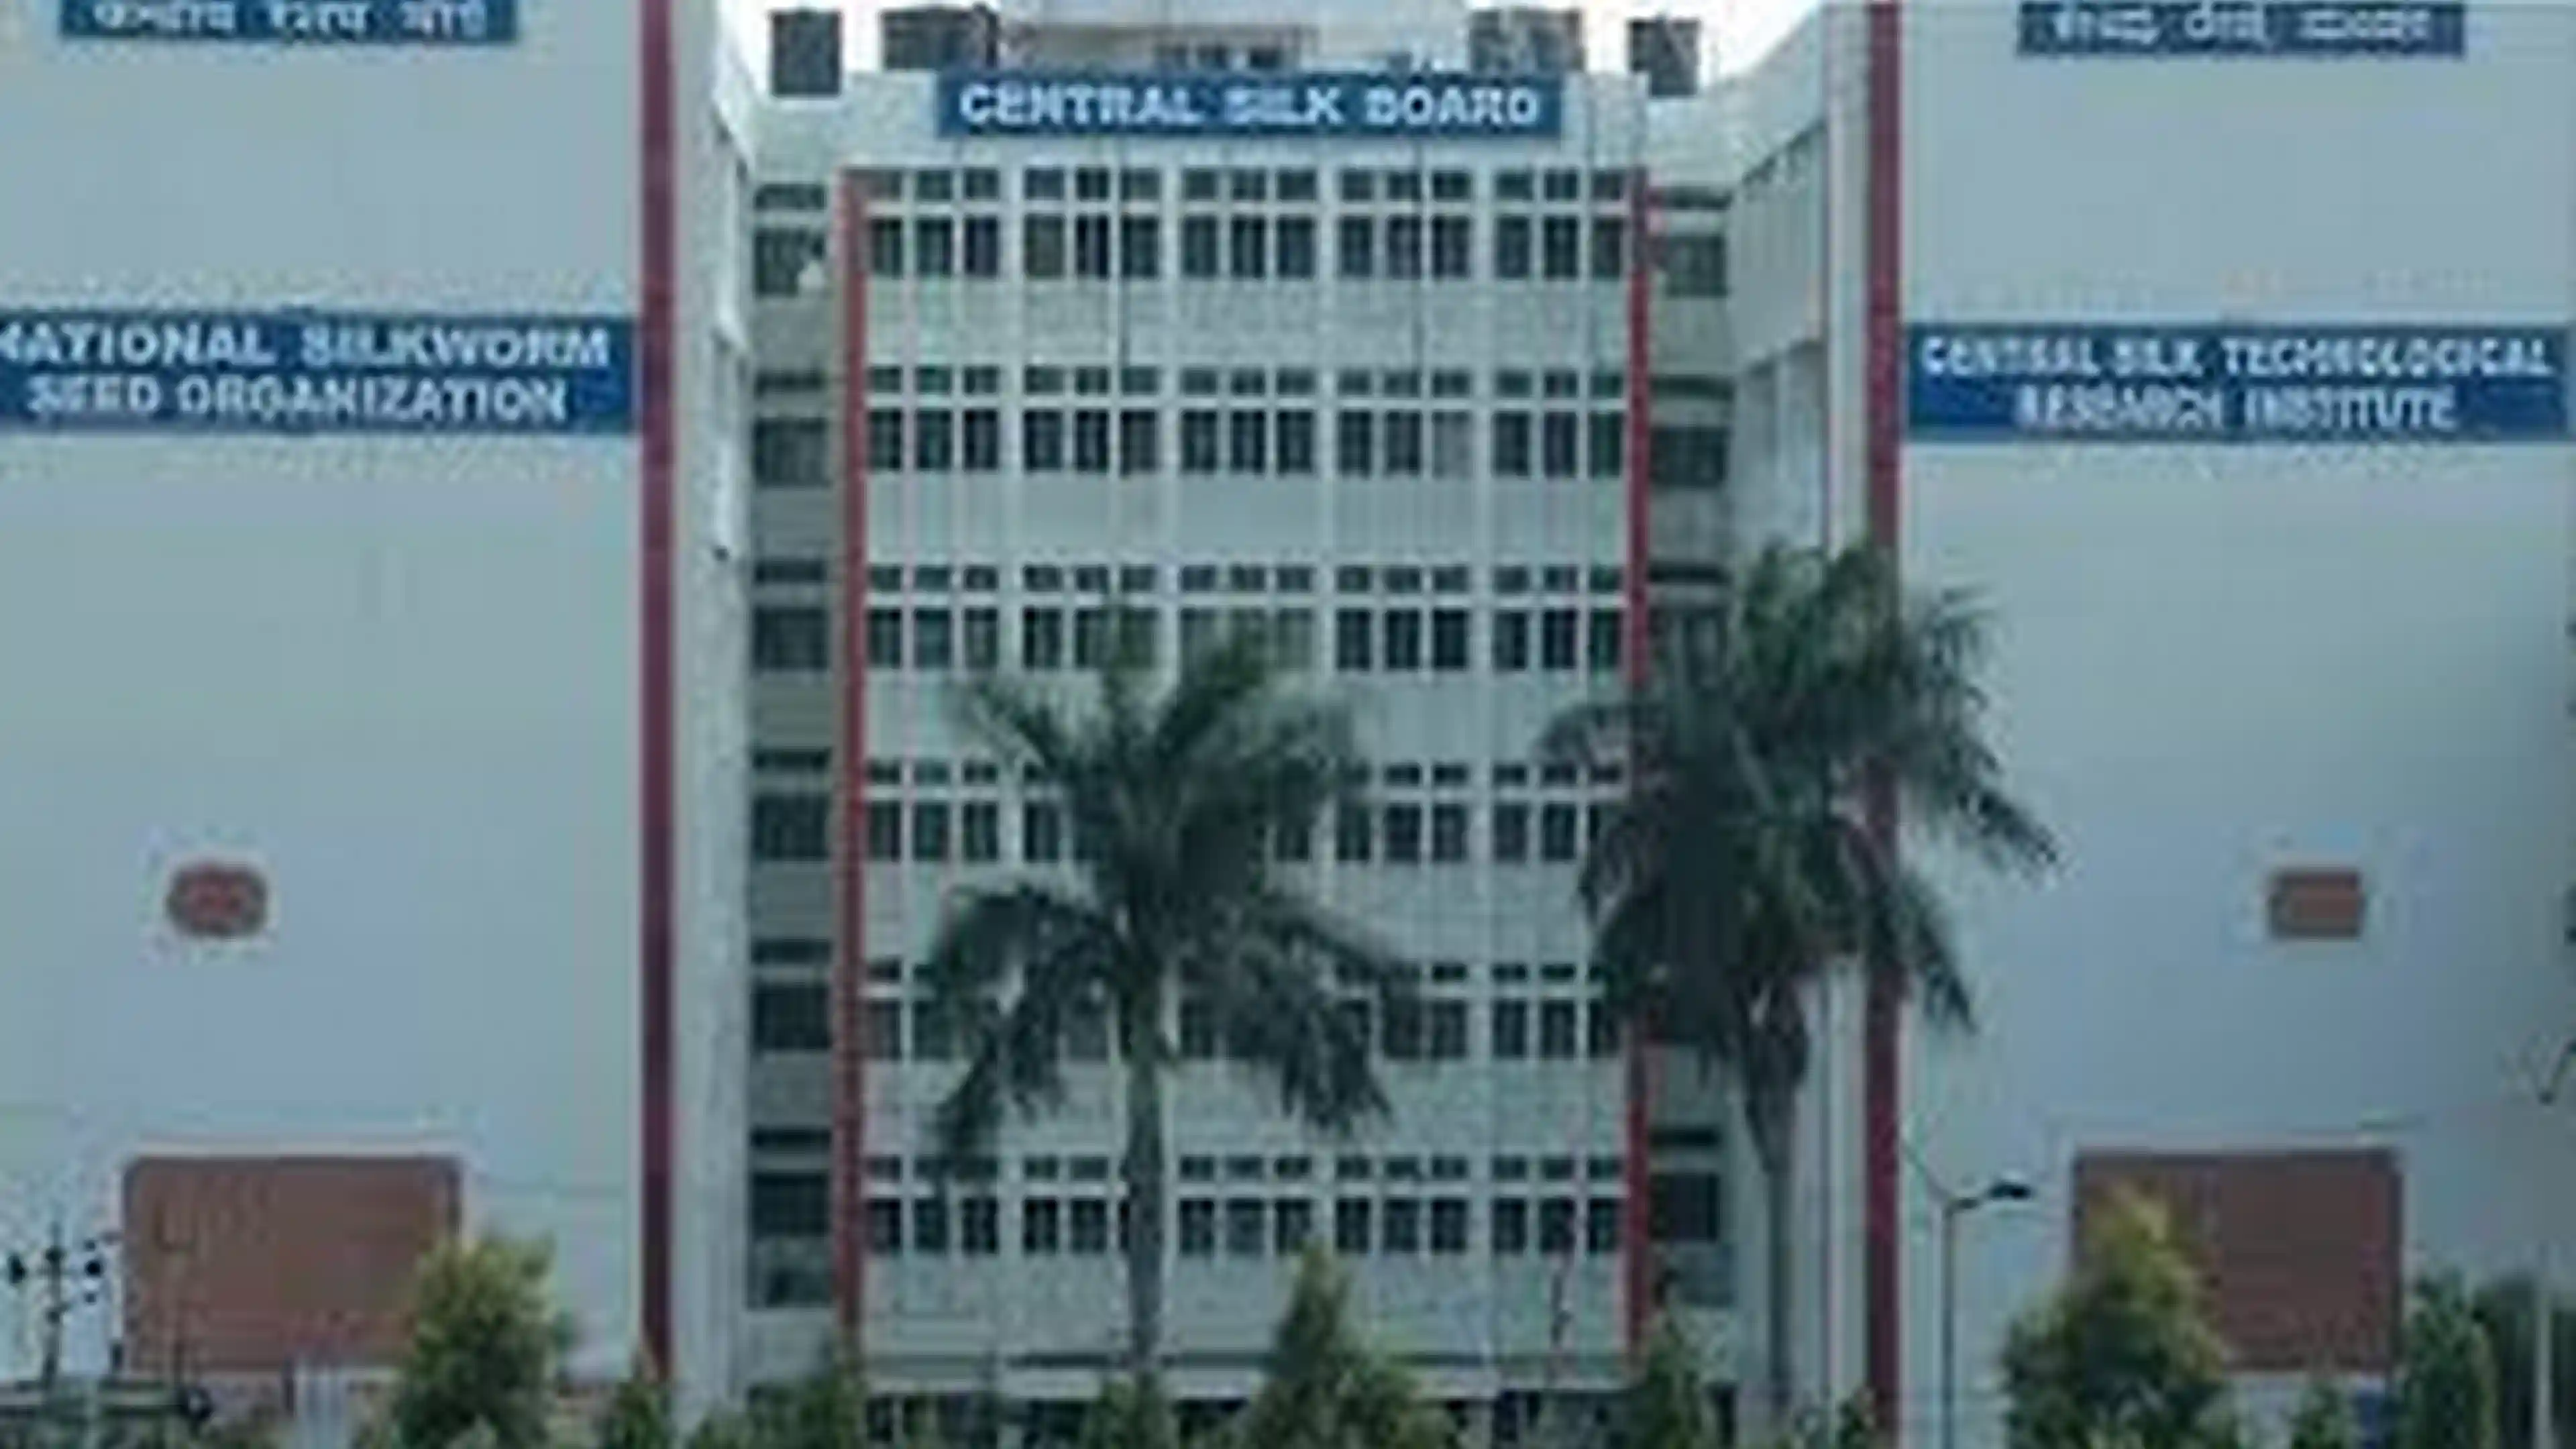 Living and Investing in Central Silk Board Bangalore